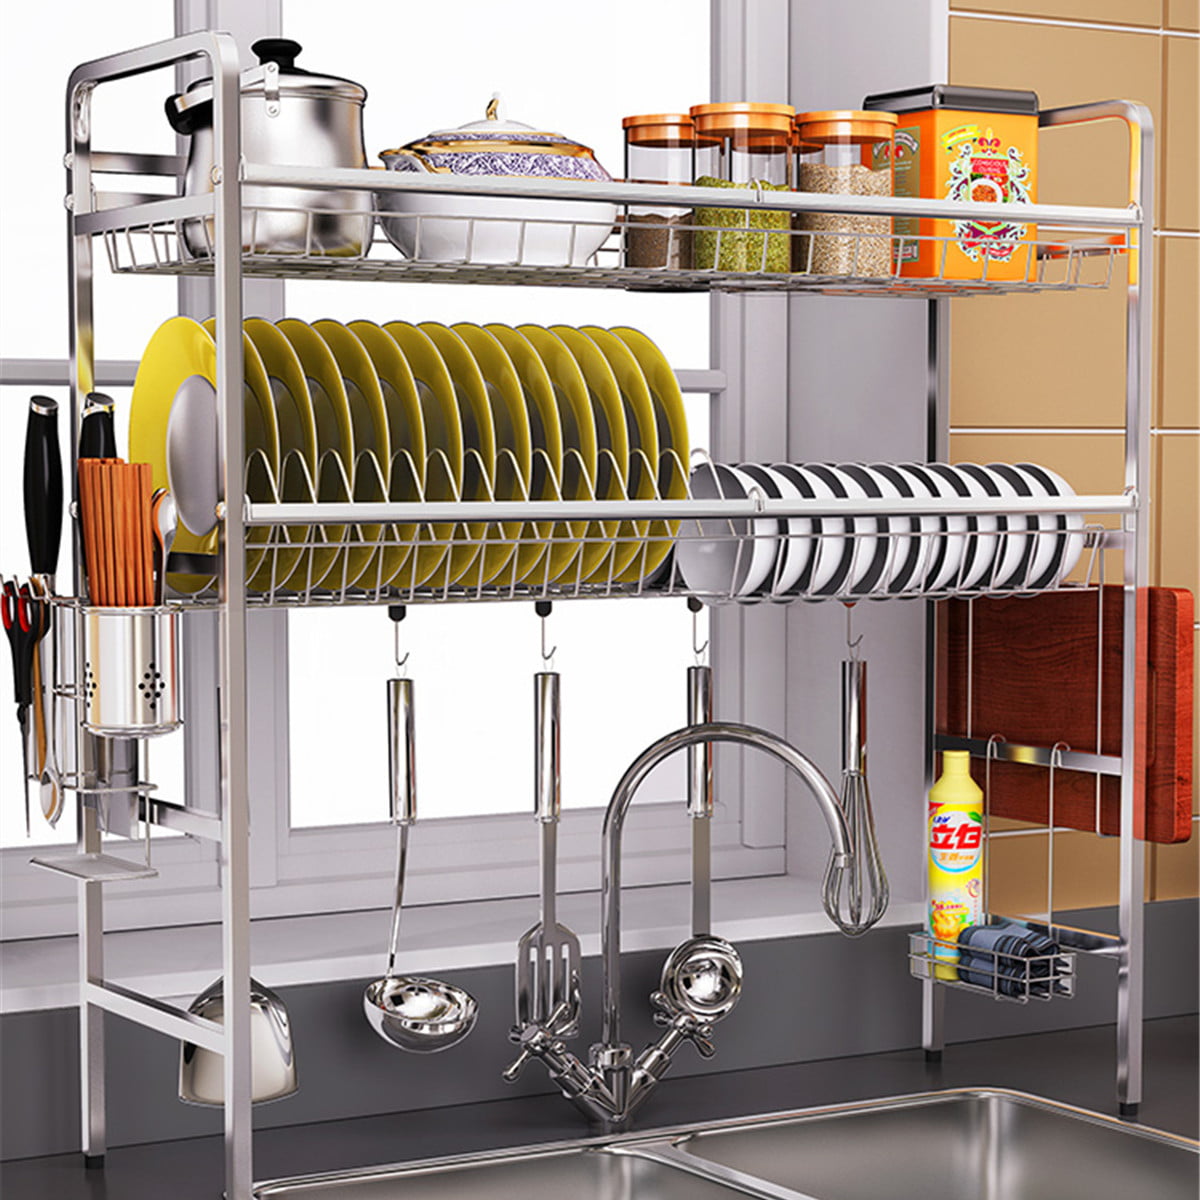 304 Stainless Steel 2 Tier Dish Drying Rack Over Sink Drainer Shelf Stainless Steel Drying Dish Rack